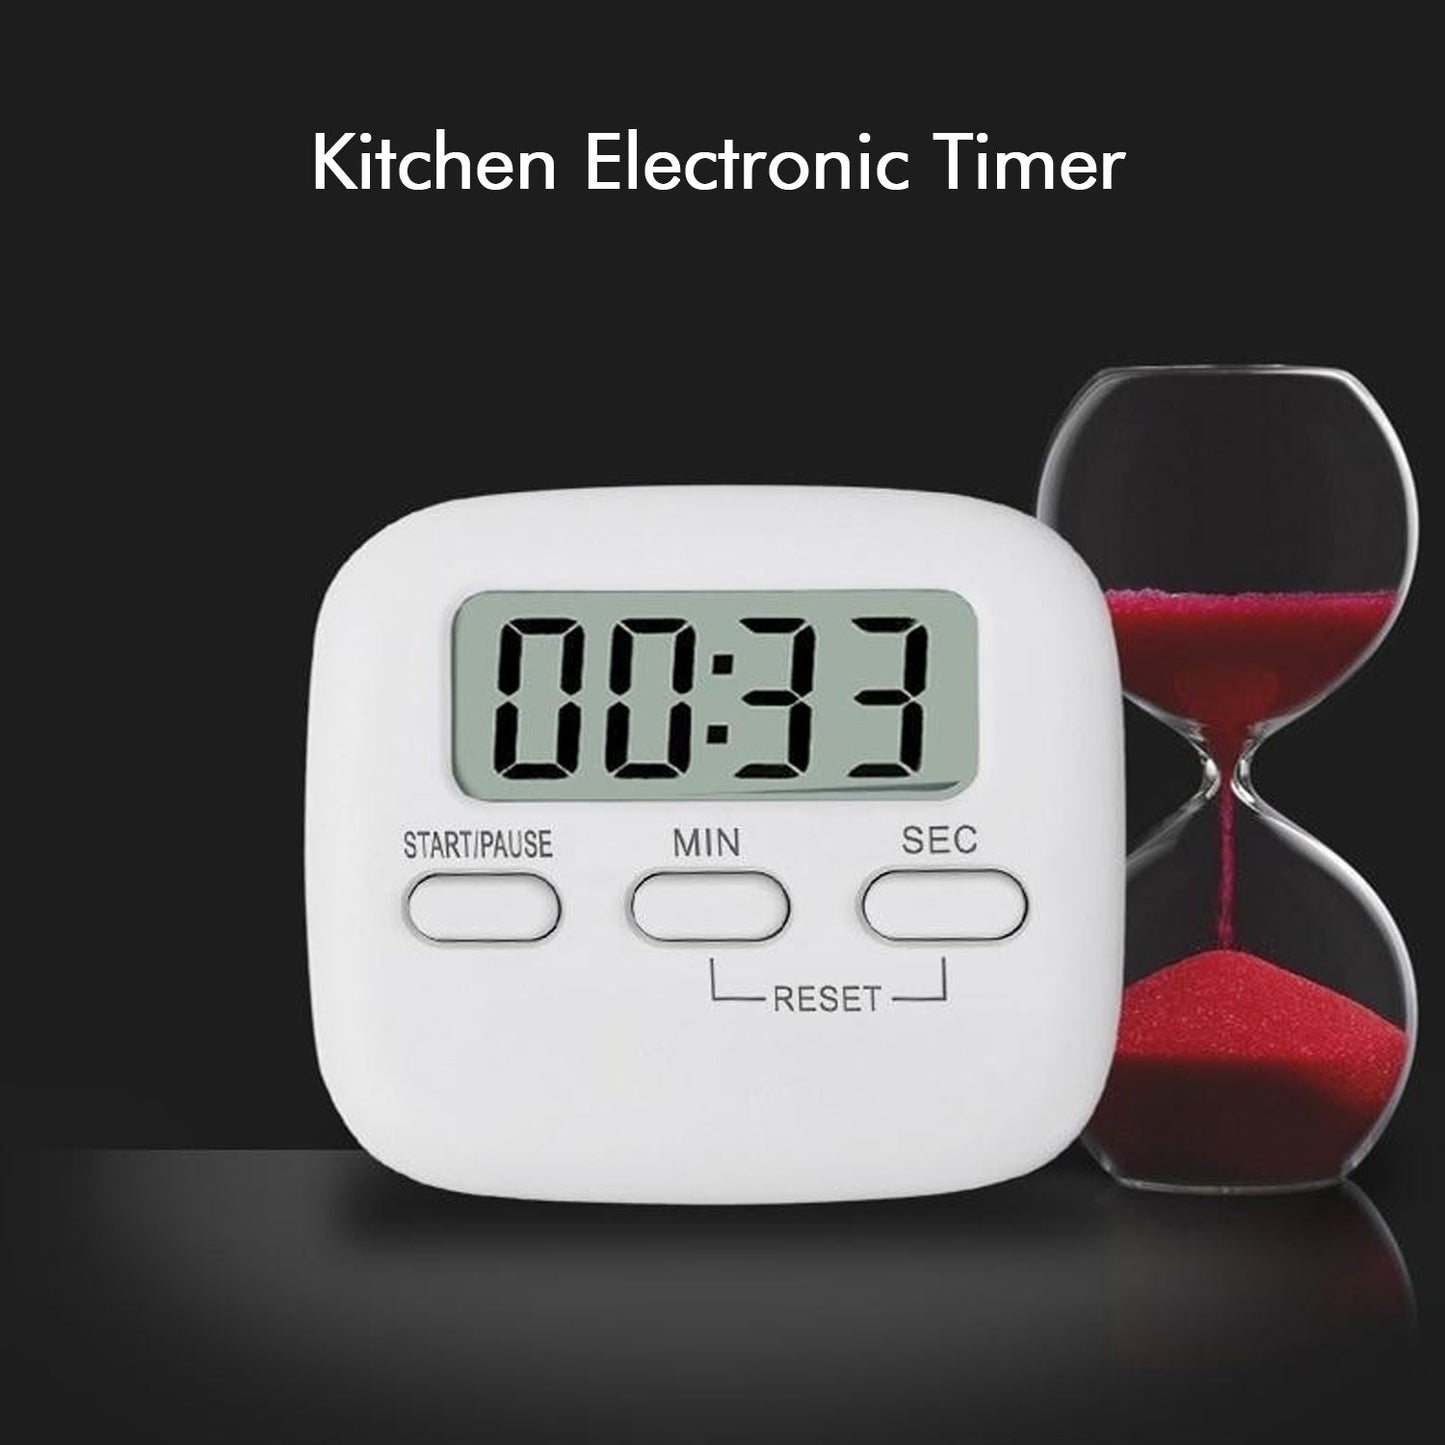 1523 Digital Kitchen Timer with Alarm | Stop Watch Timer for Kitchen | Kitchen Timer with Magnetic Stand |Timer Clock for Study